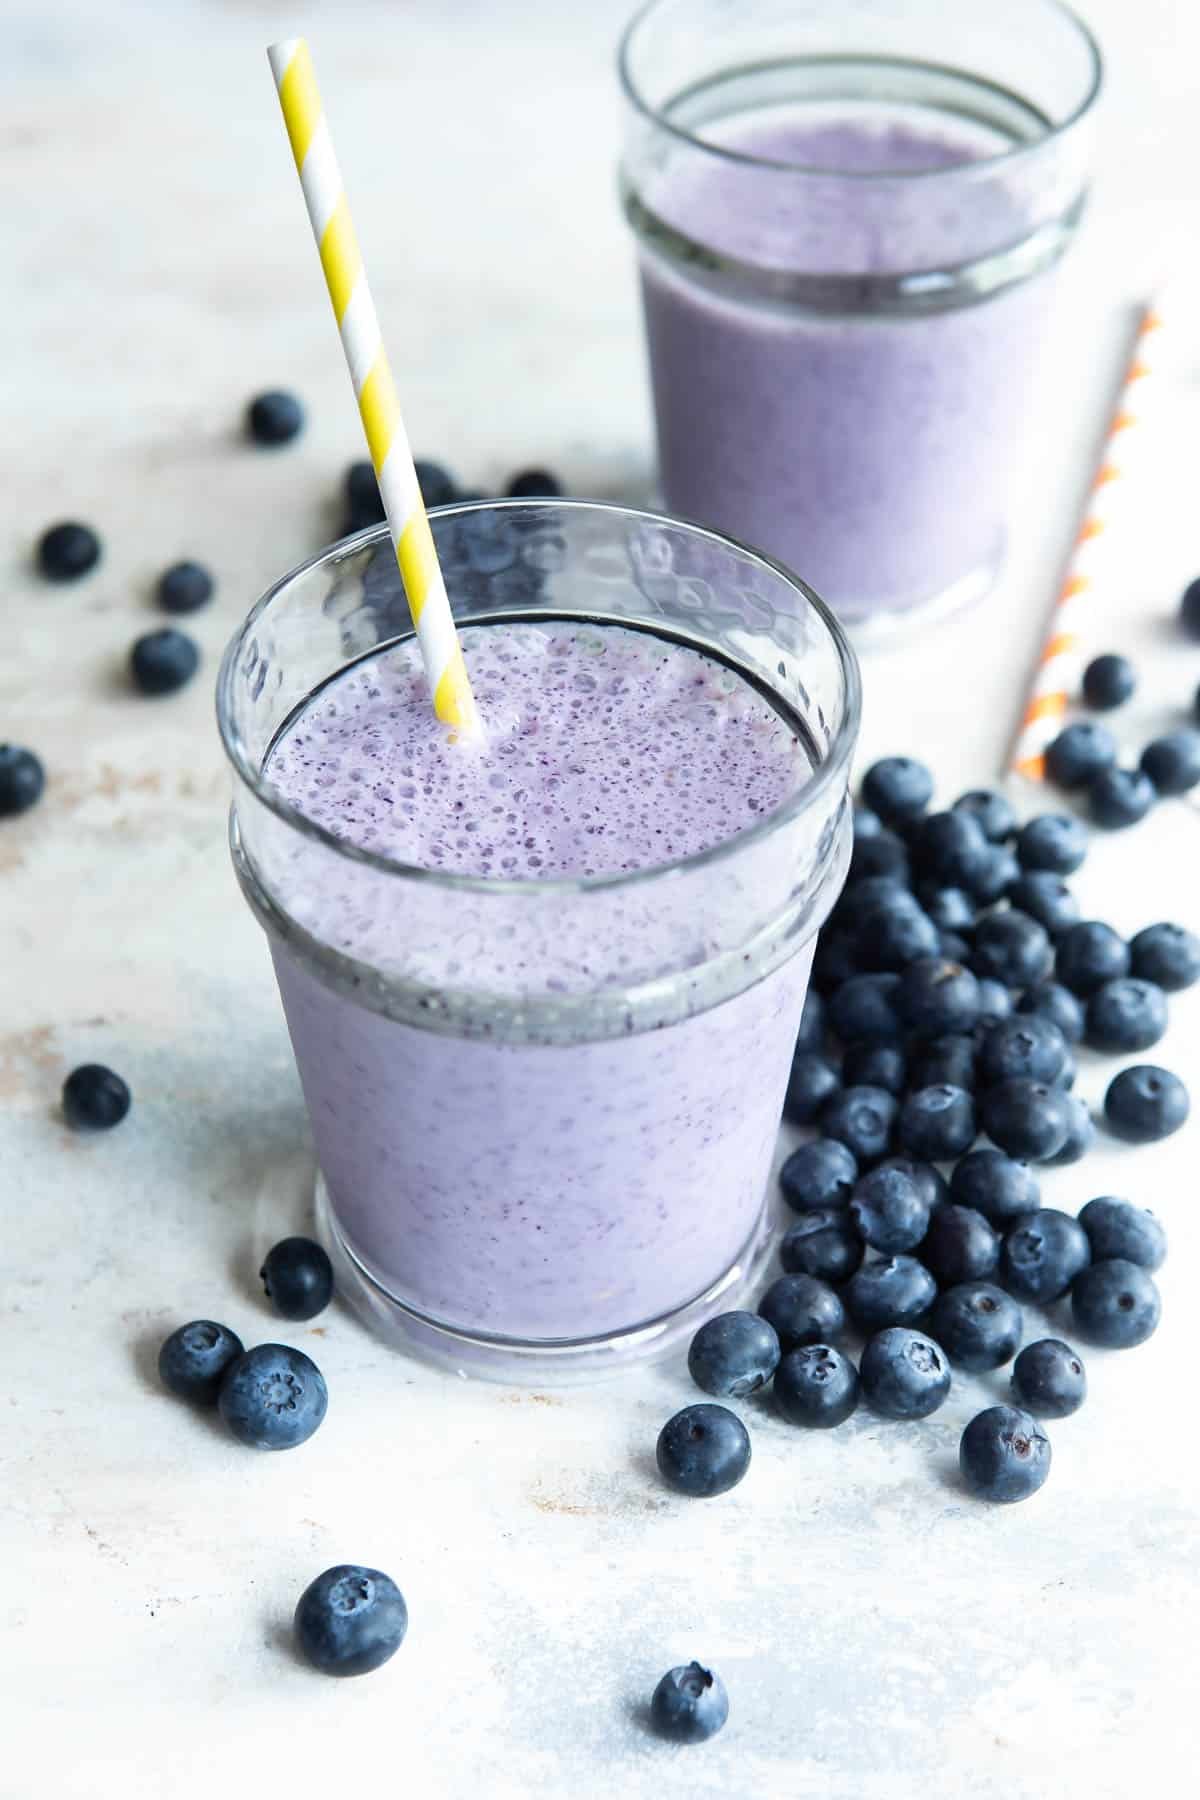 2 glasses of blueberry smoothies next to fresh blueberries.